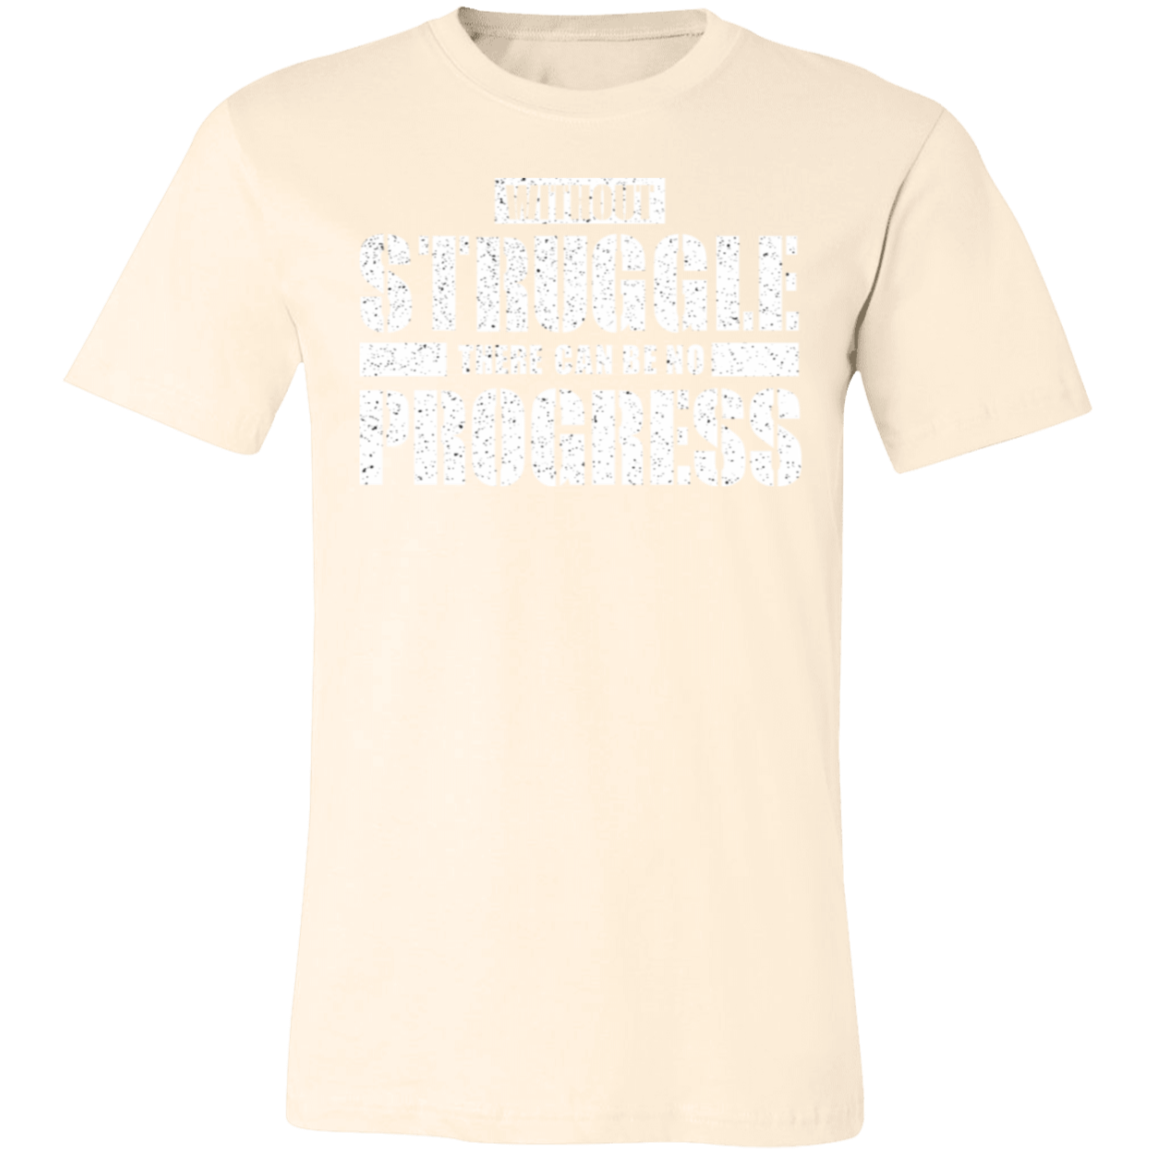 Struggle Their can be no Progress Premium Women's Tee - Game Day Getup